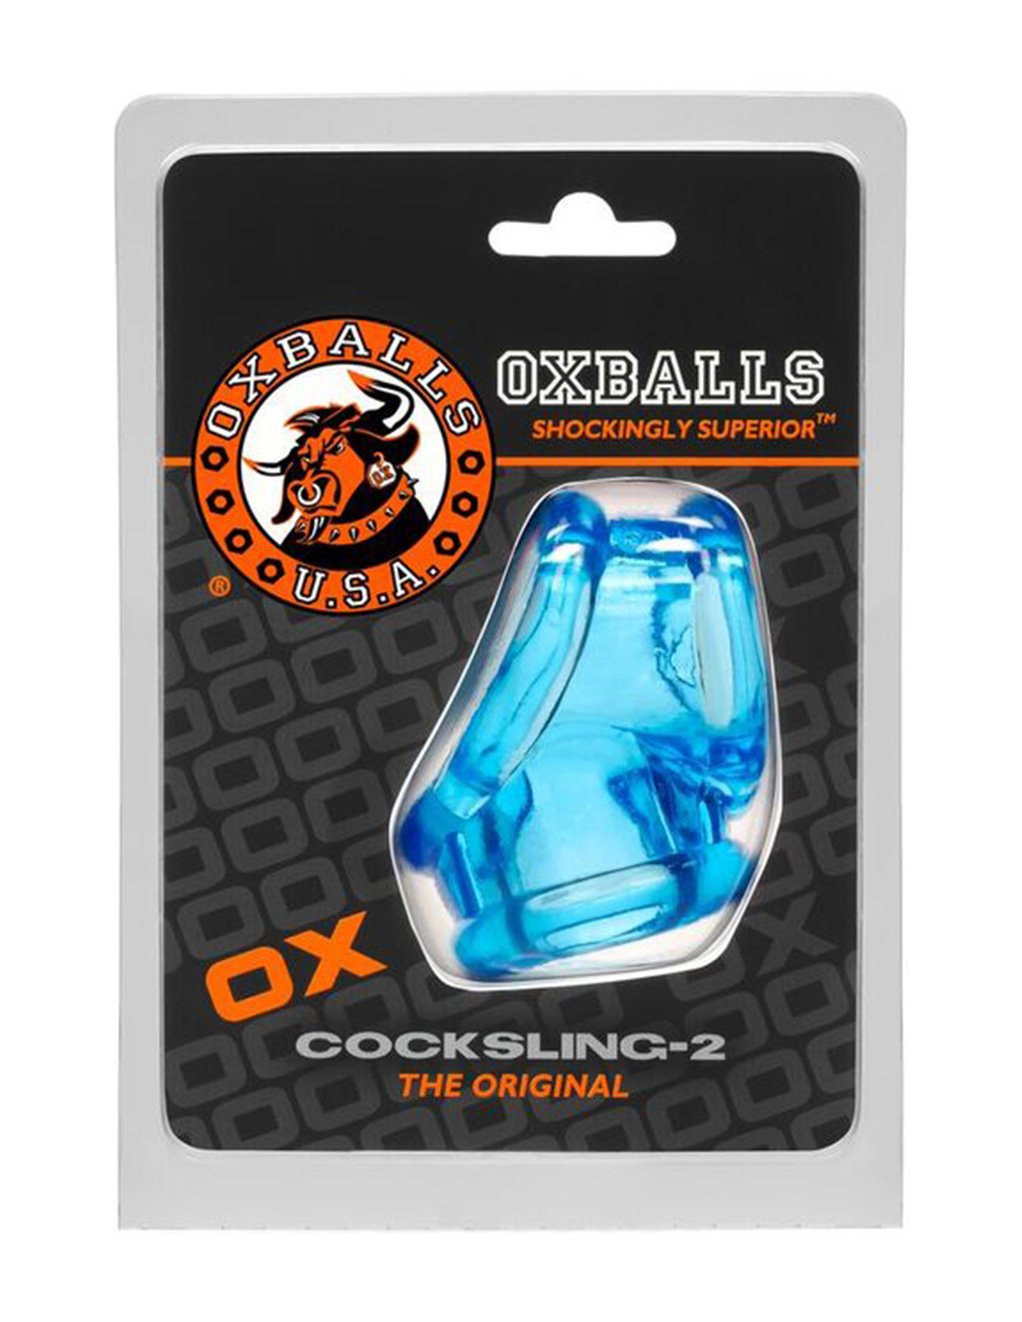 Oxballs Cocksling 2- Front package